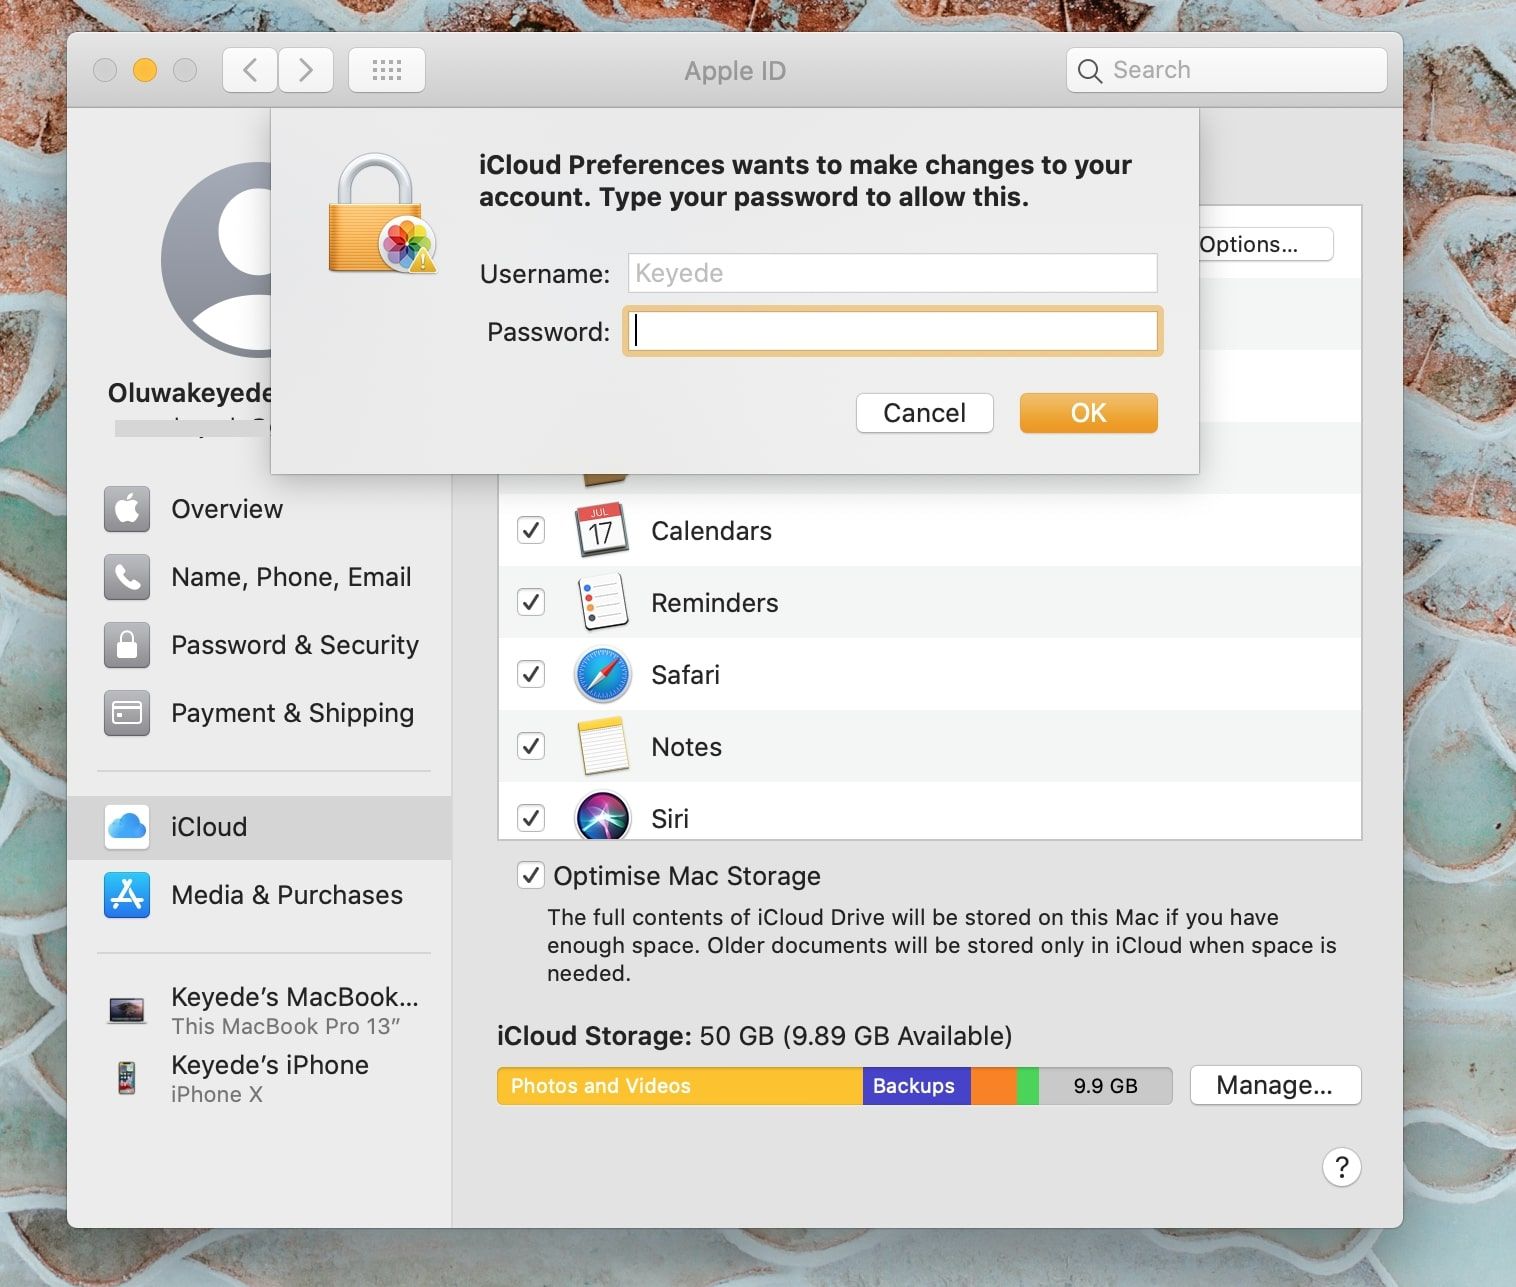 Mac iCloud Settings Page showing an admin password request